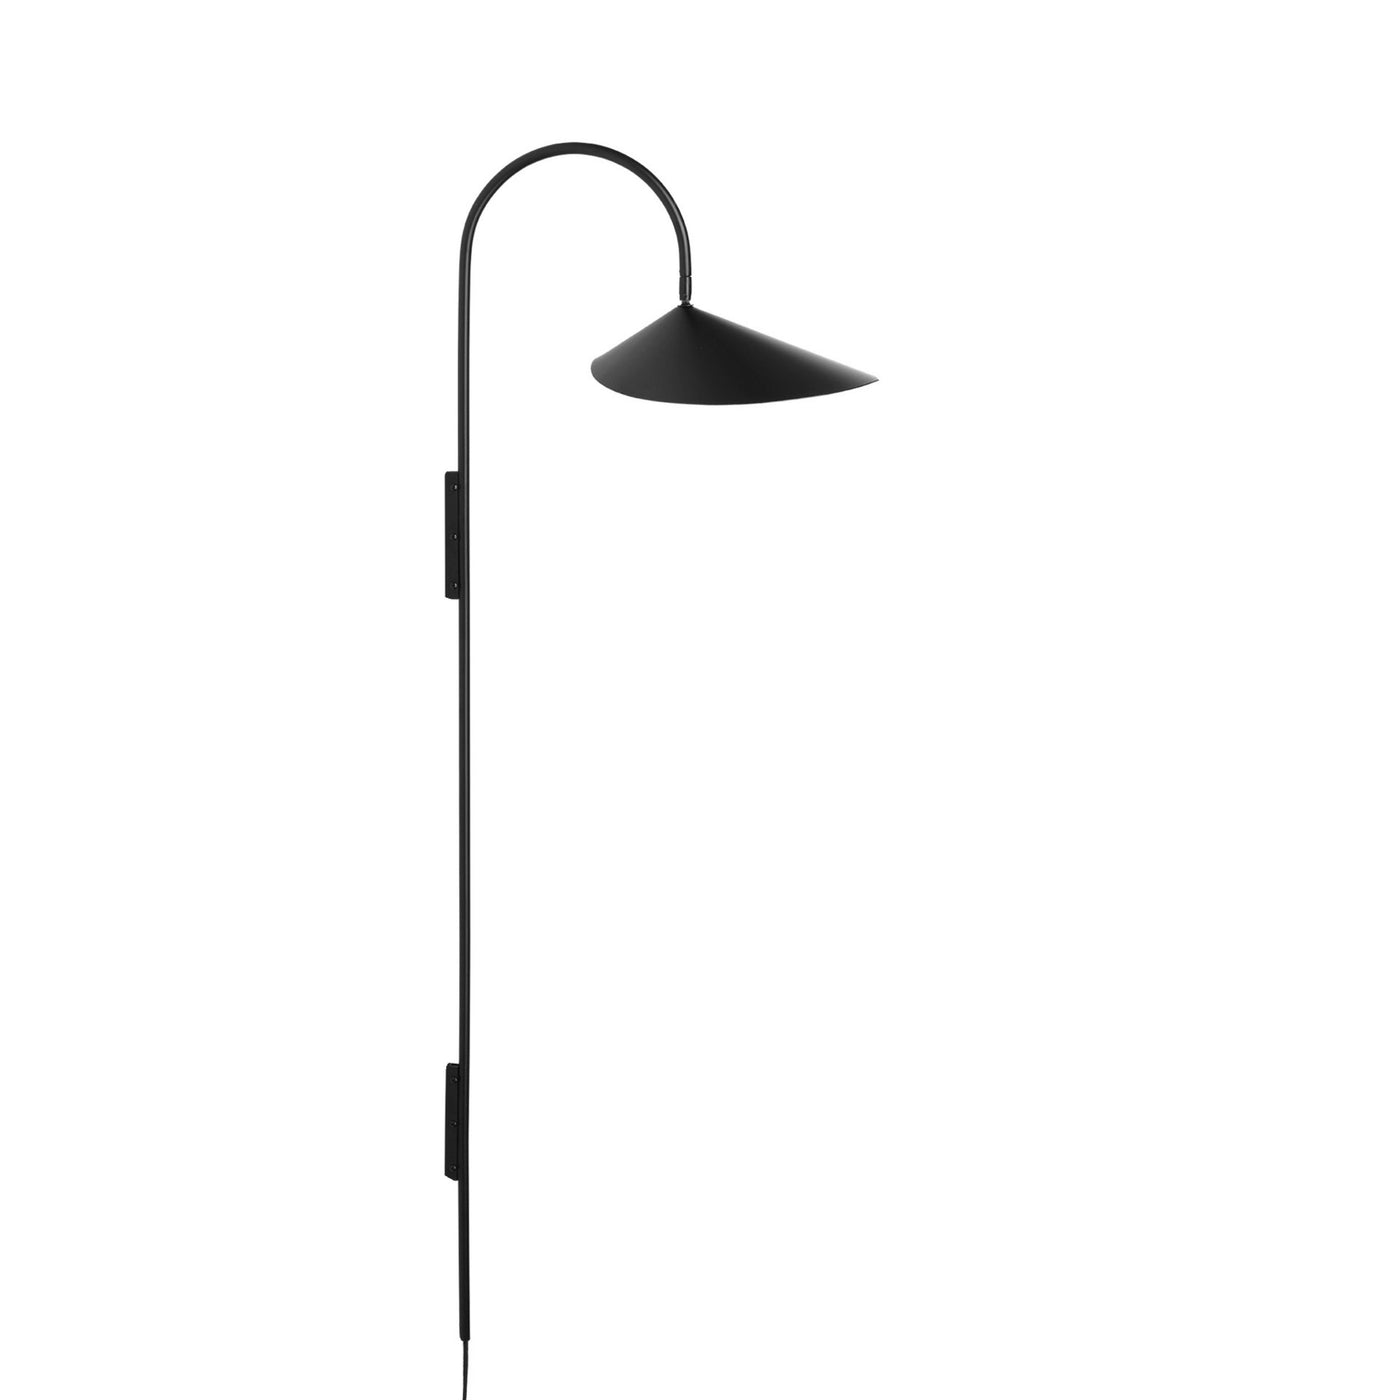 ferm living arum wall lamp tall black, ideal minimalist bedside light. Available to buy from someday designs. #colour_black